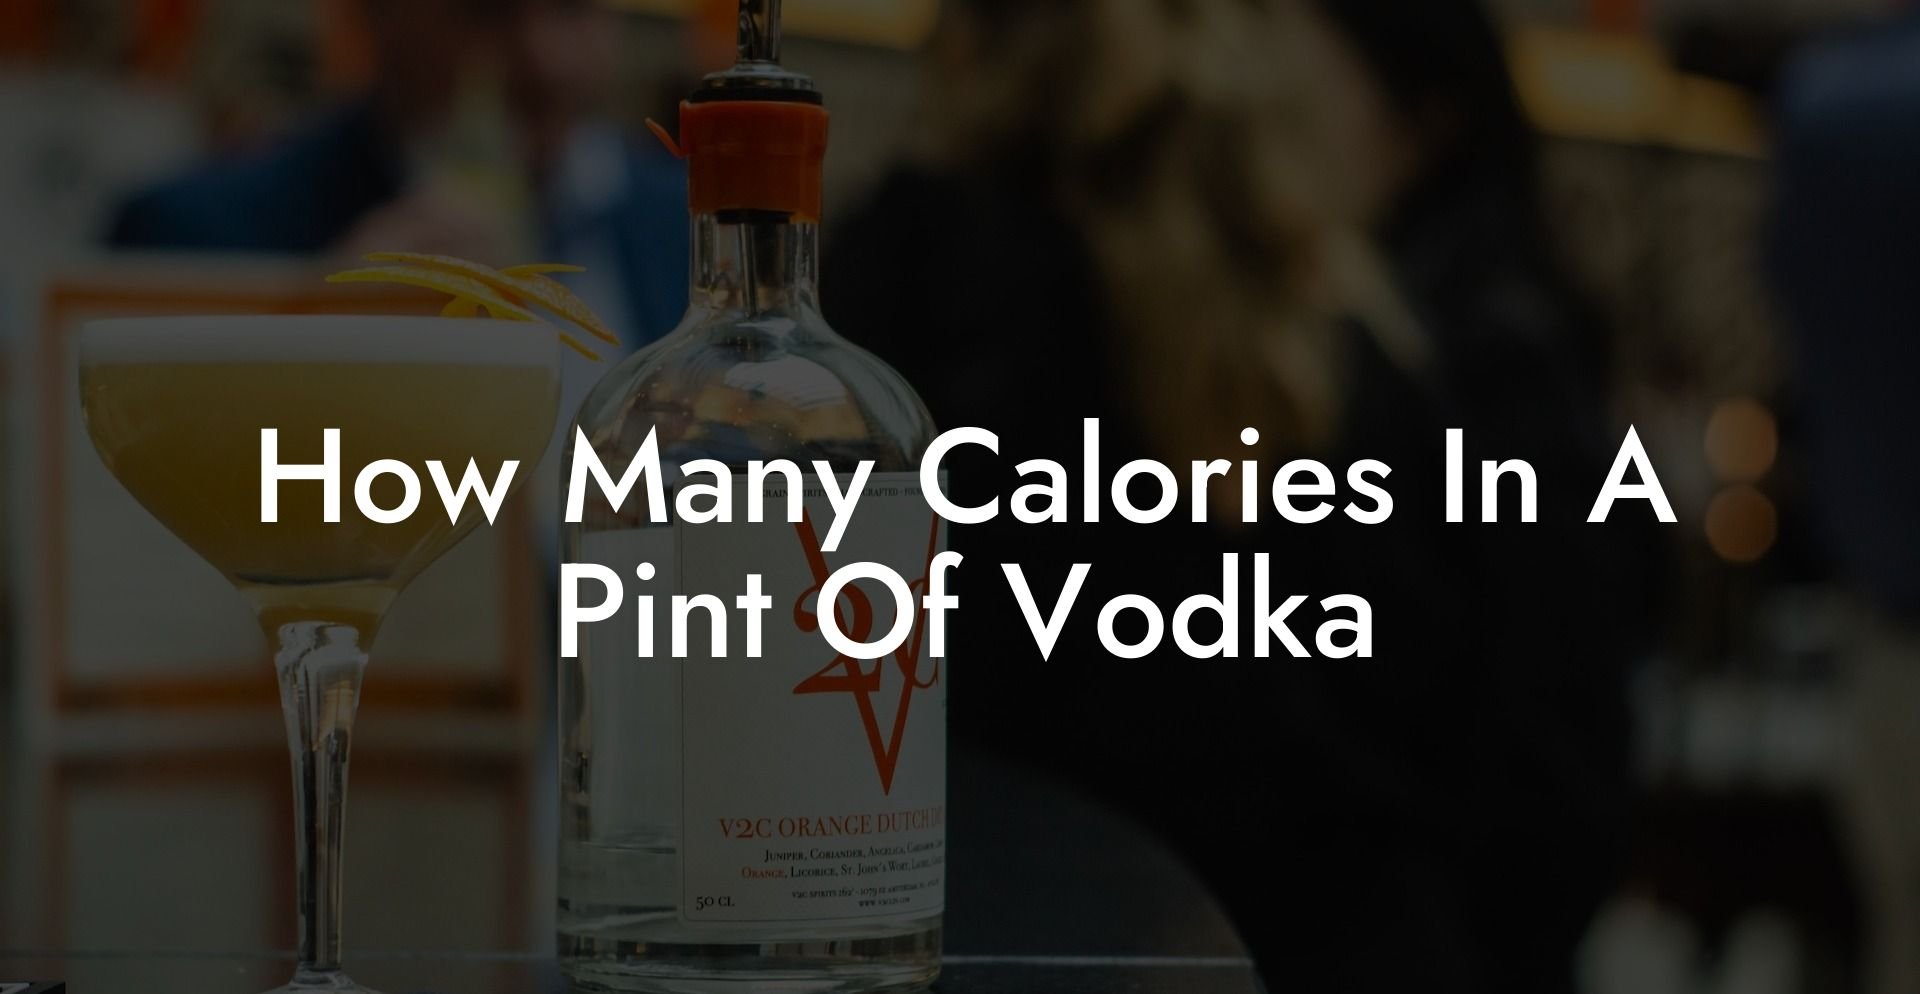 How Many Calories In A Pint Of Vodka